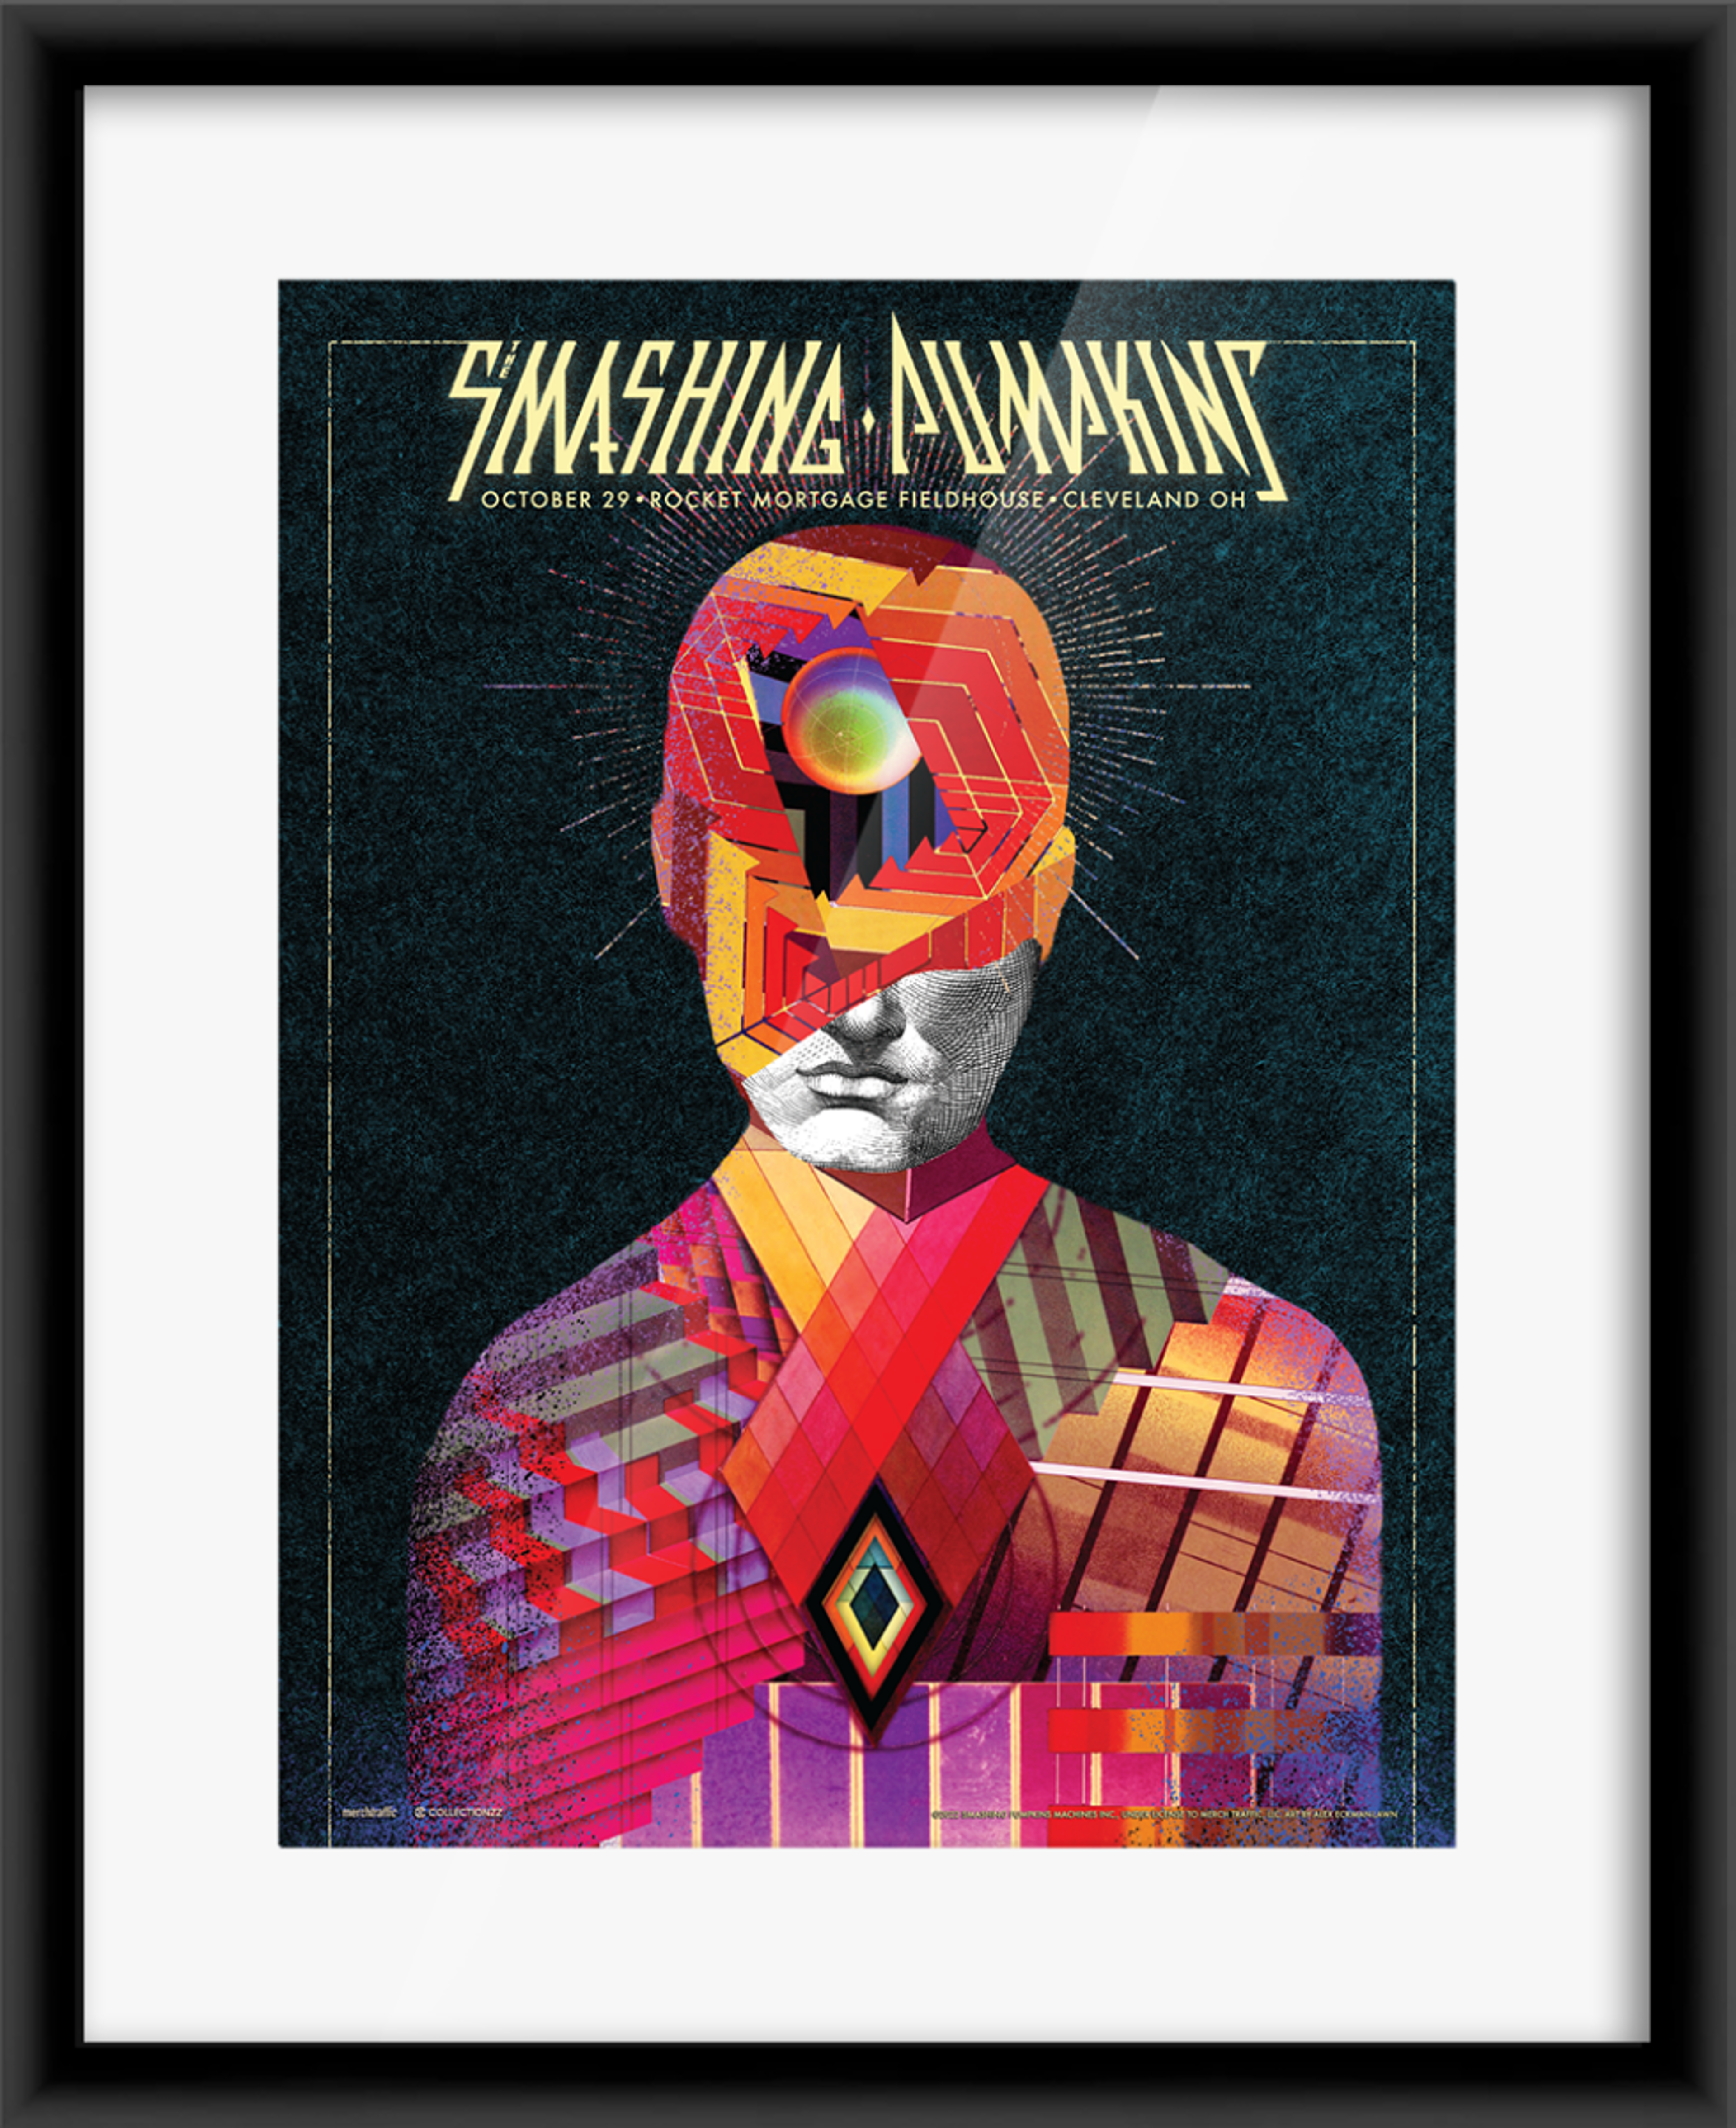 Alternate View 1 of The Smashing Pumpkins Cleveland October 29, 2022 Print